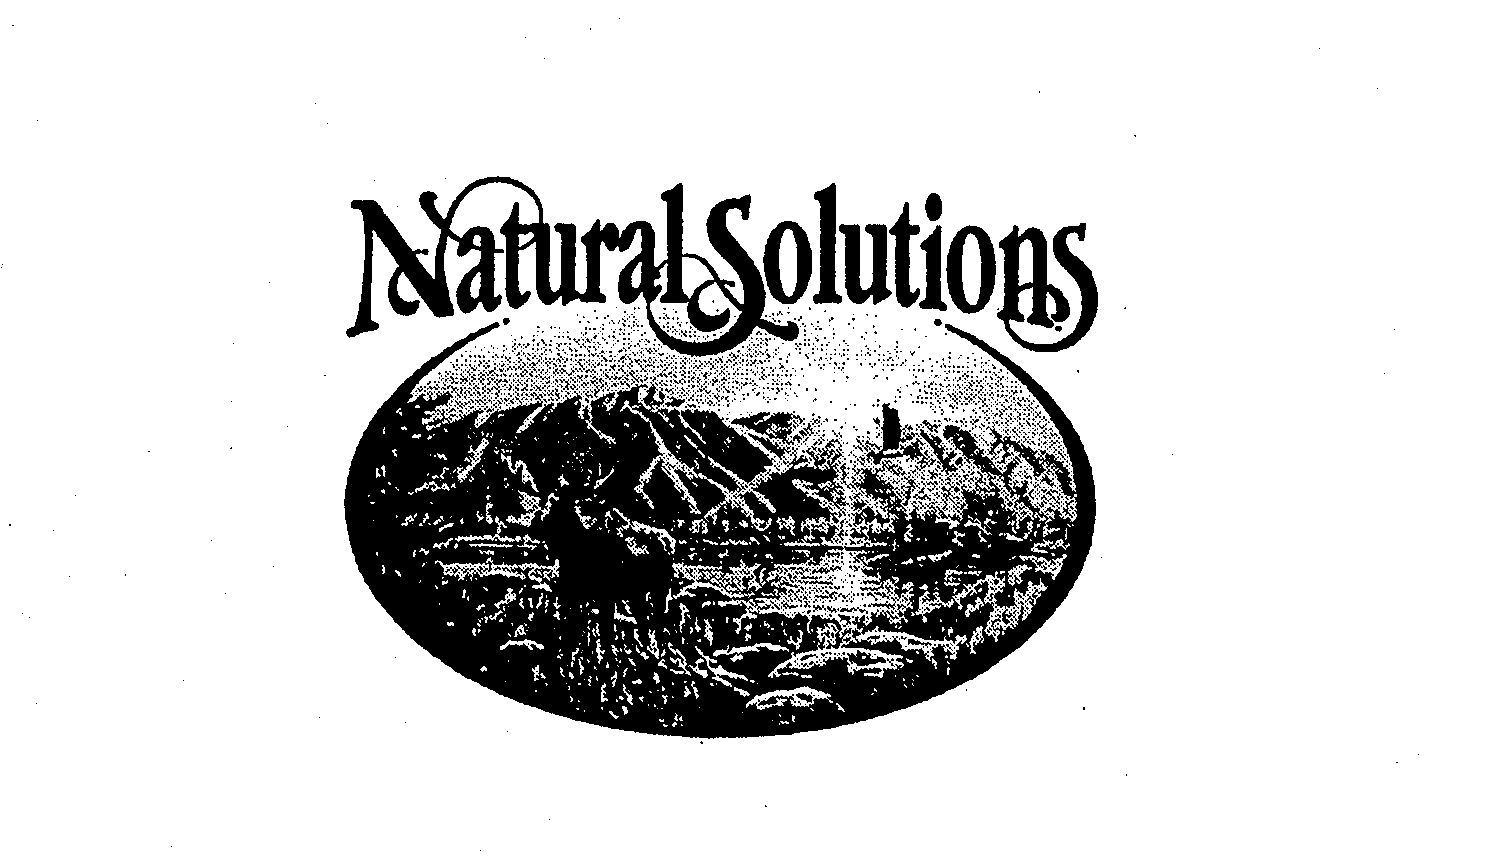 NATURAL SOLUTIONS